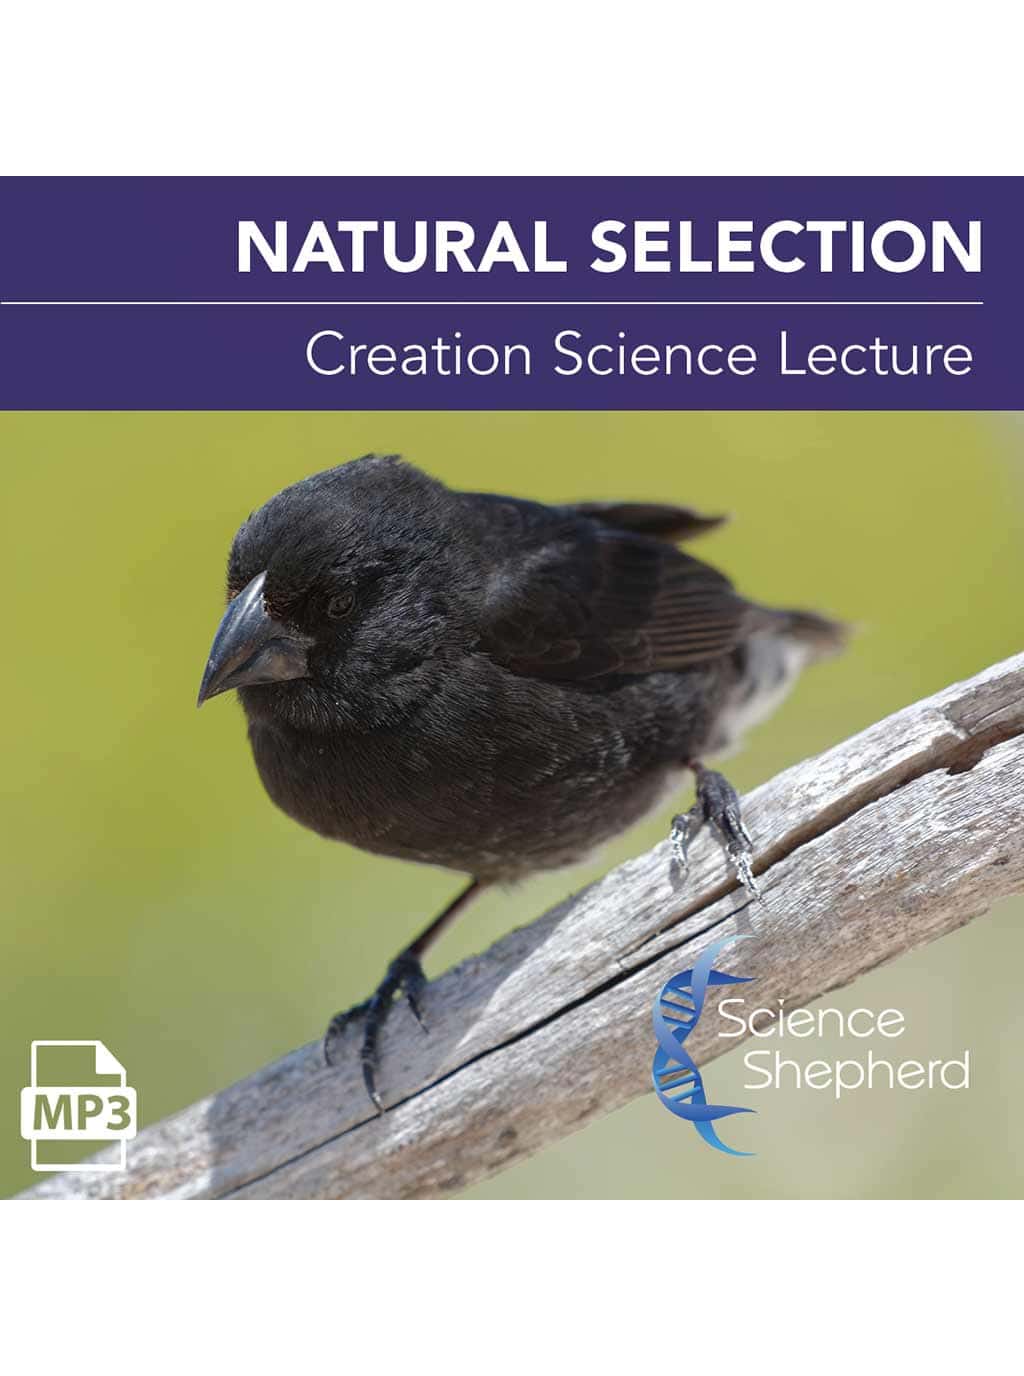 Science Shepherd Biblical Science Curriculum Lecture "Natural Selection" cover of finch